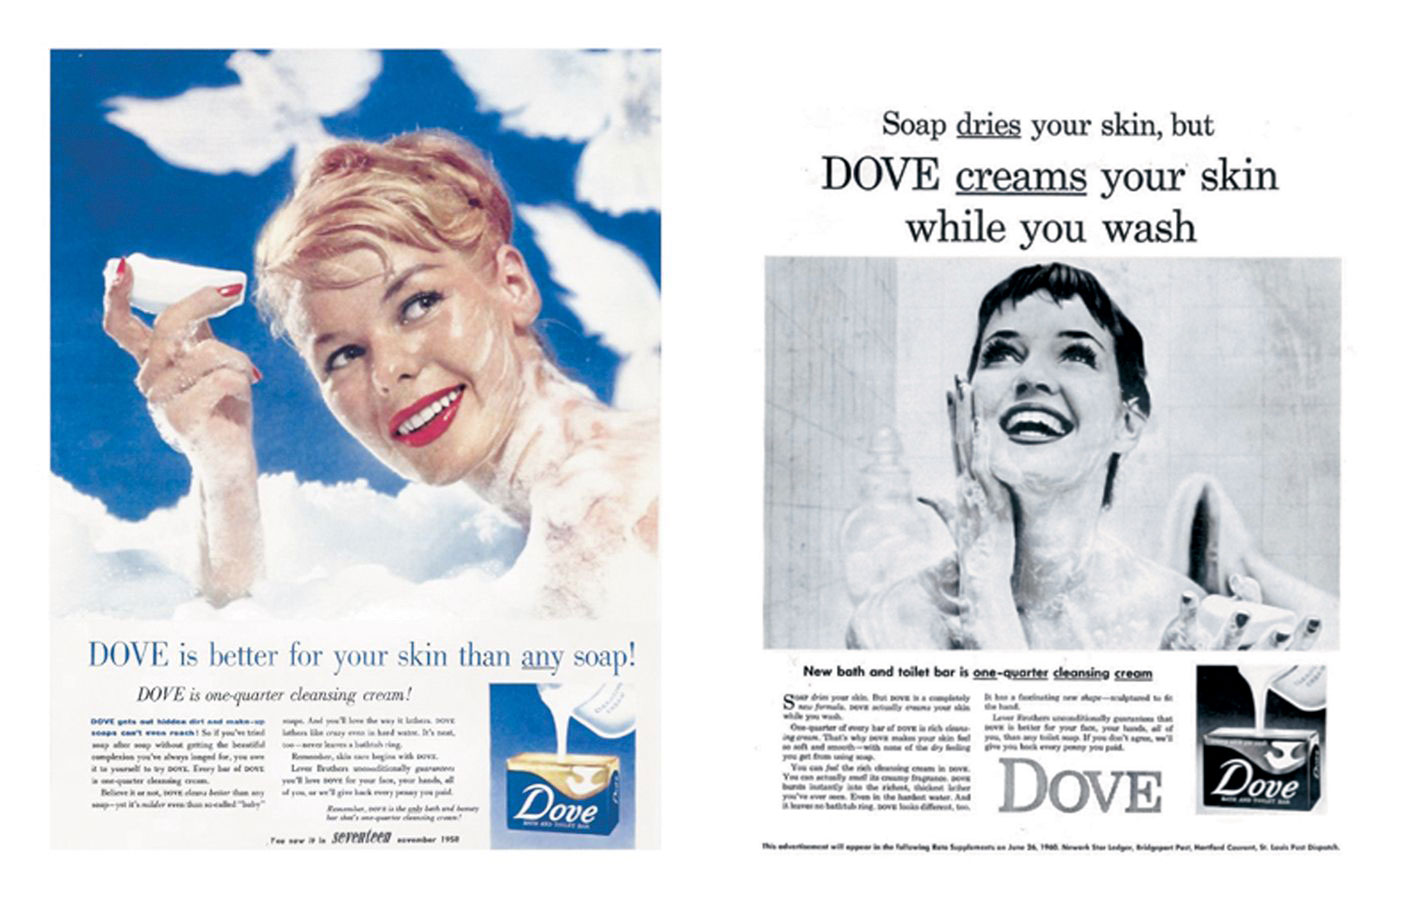 Dove advertisements from 1958 (left) and 1960(right)